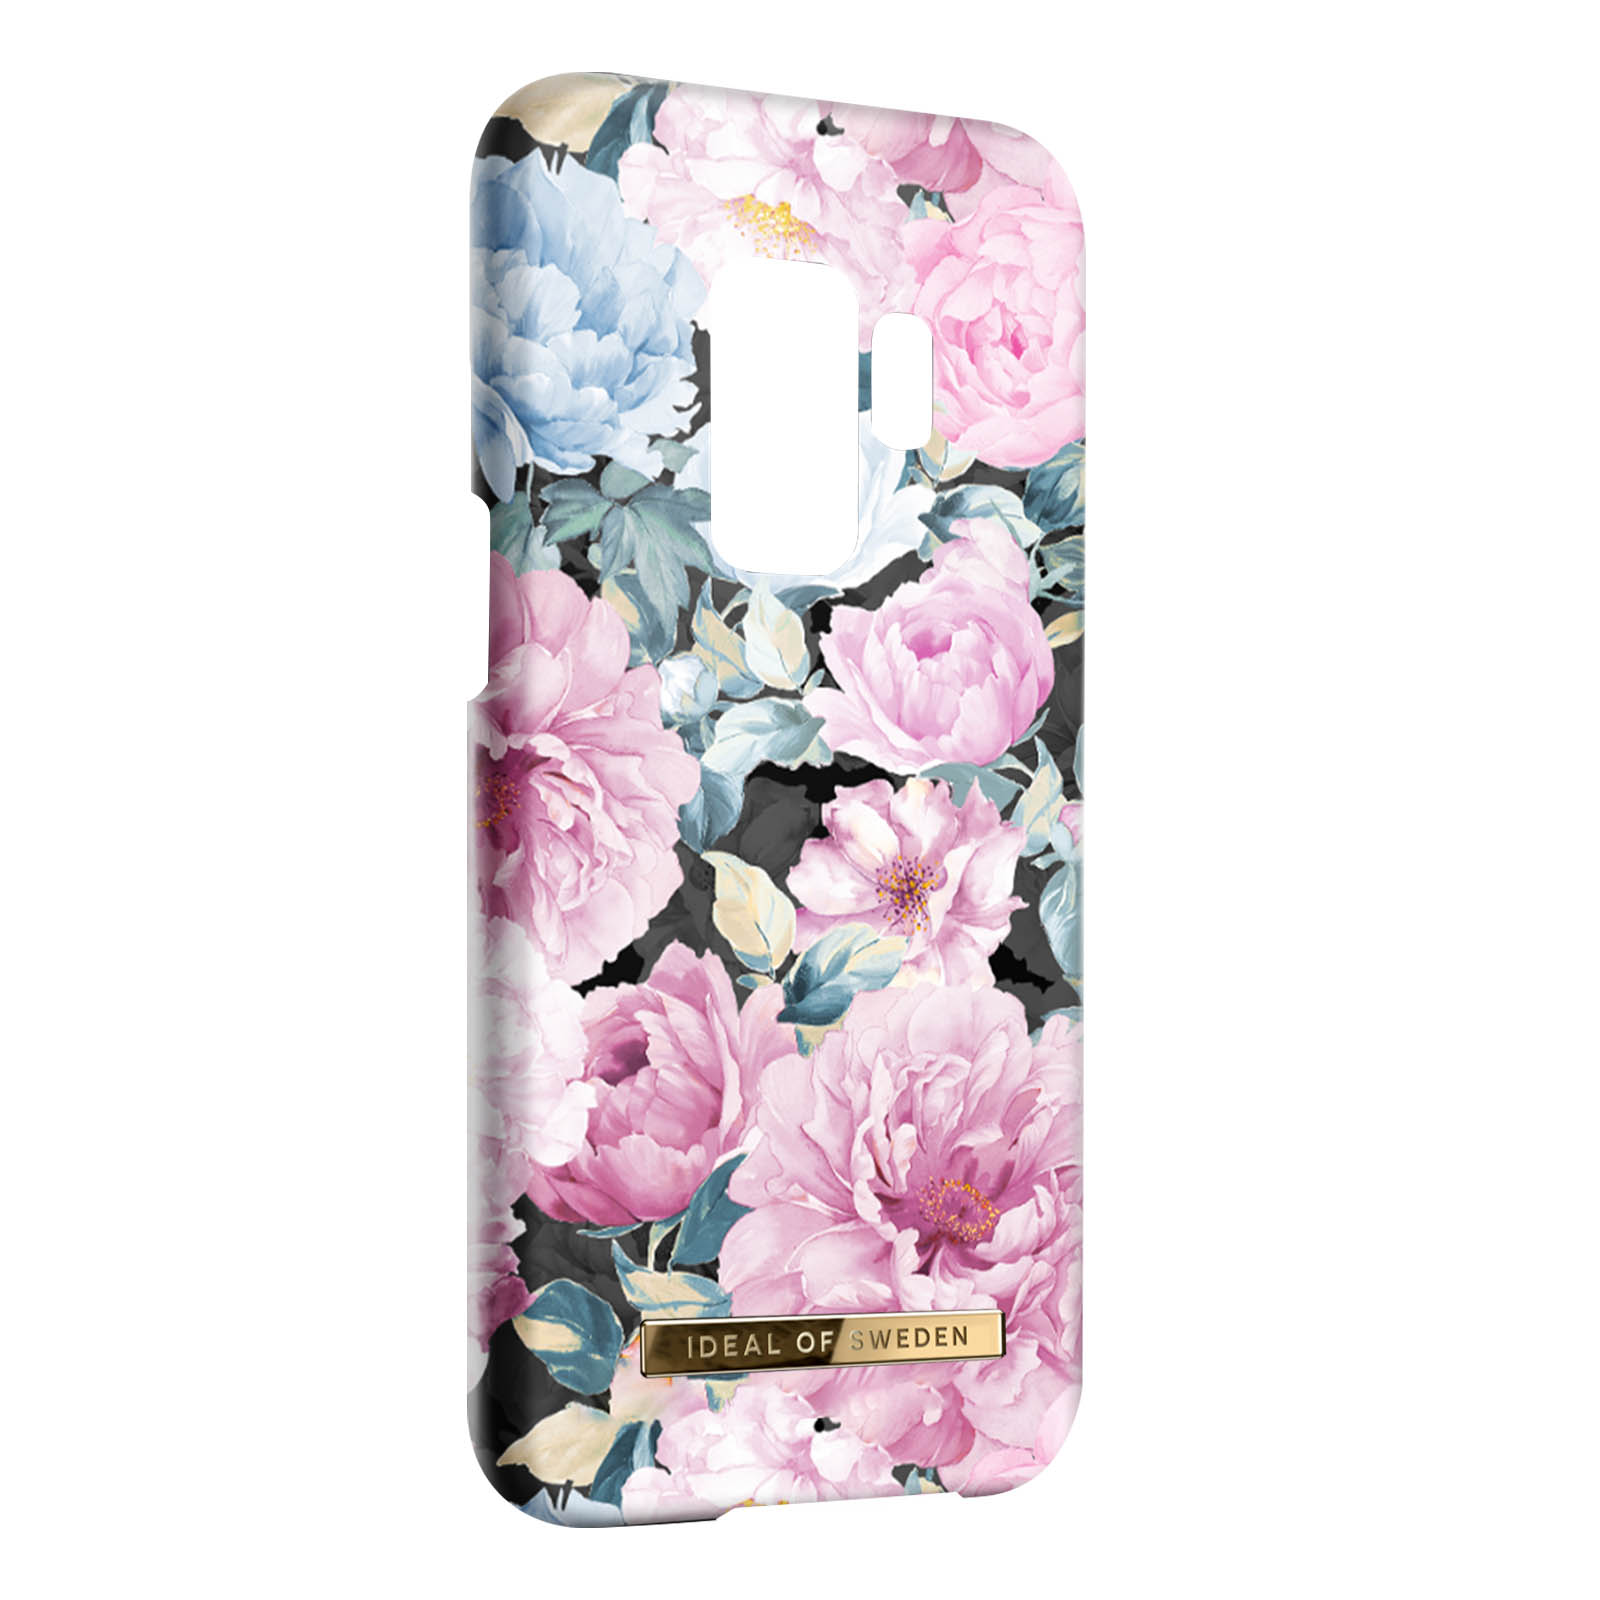 Series, Peony S9, Hülle IDEAL Samsung, Galaxy SWEDEN Garden Rosa Backcover, OF